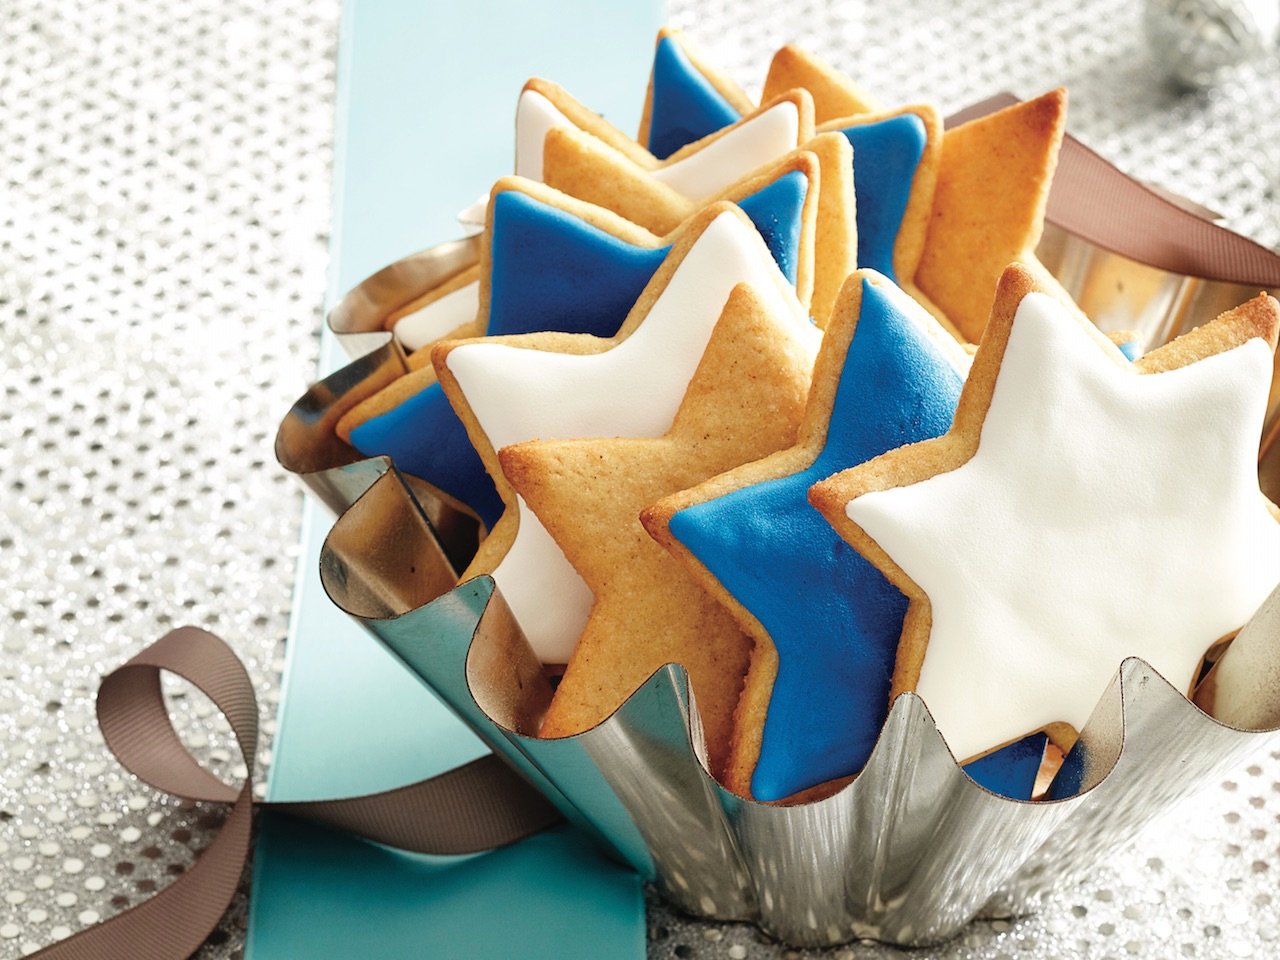 royal icing decorated start-shaped sugar cookies in a small brioche tin